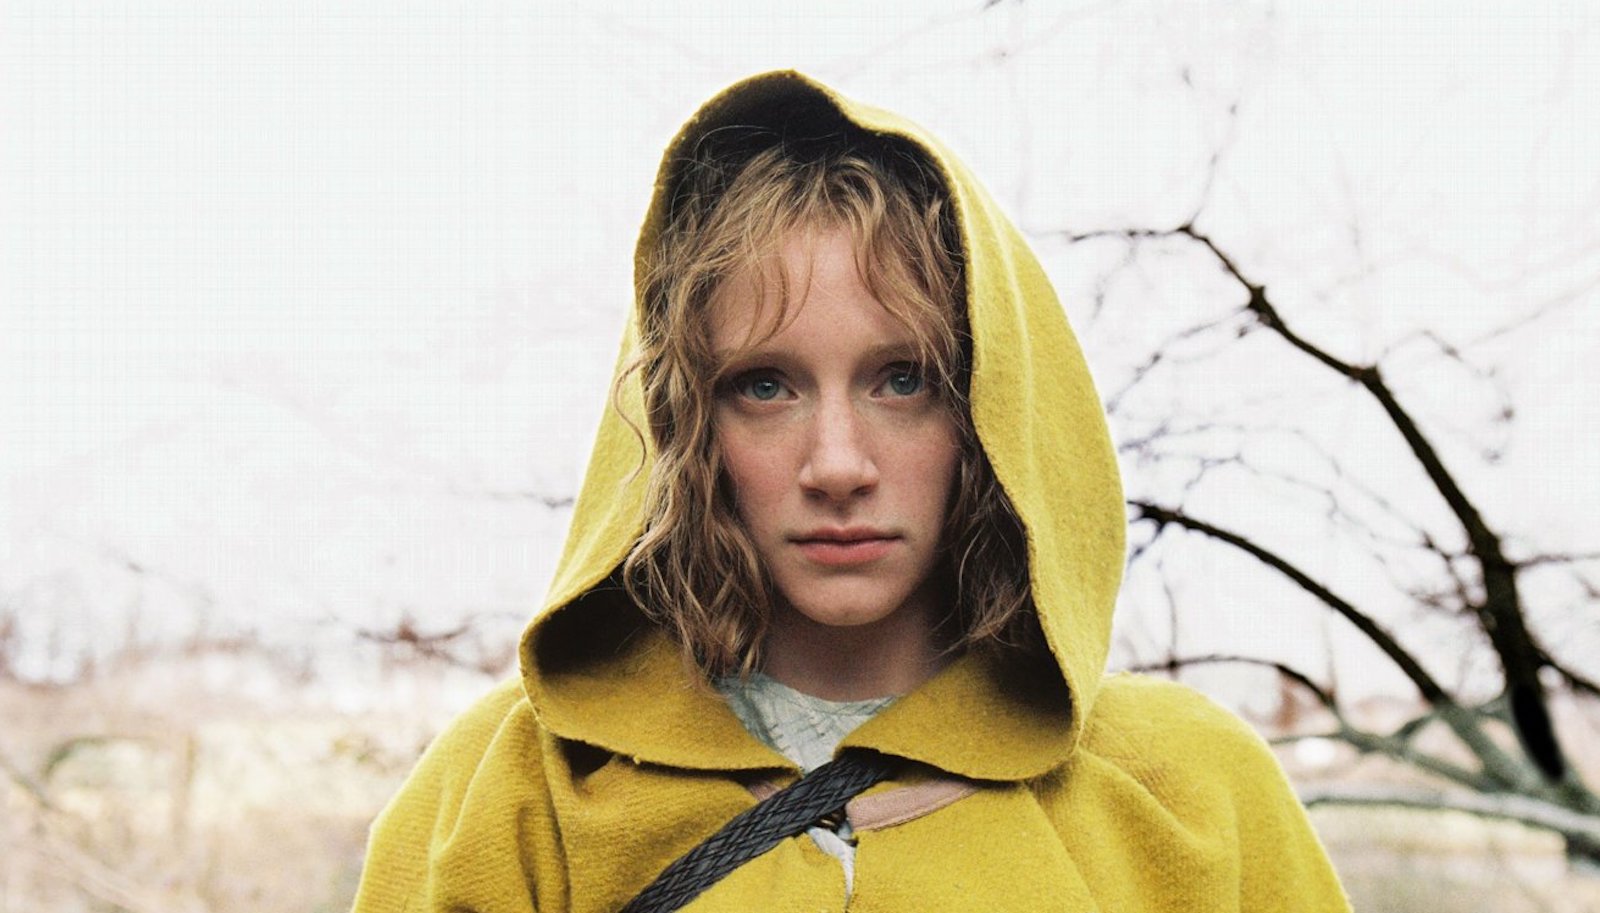 A young woman in a yellow hooded jacket looks at camera ominously in front of bare tree branches